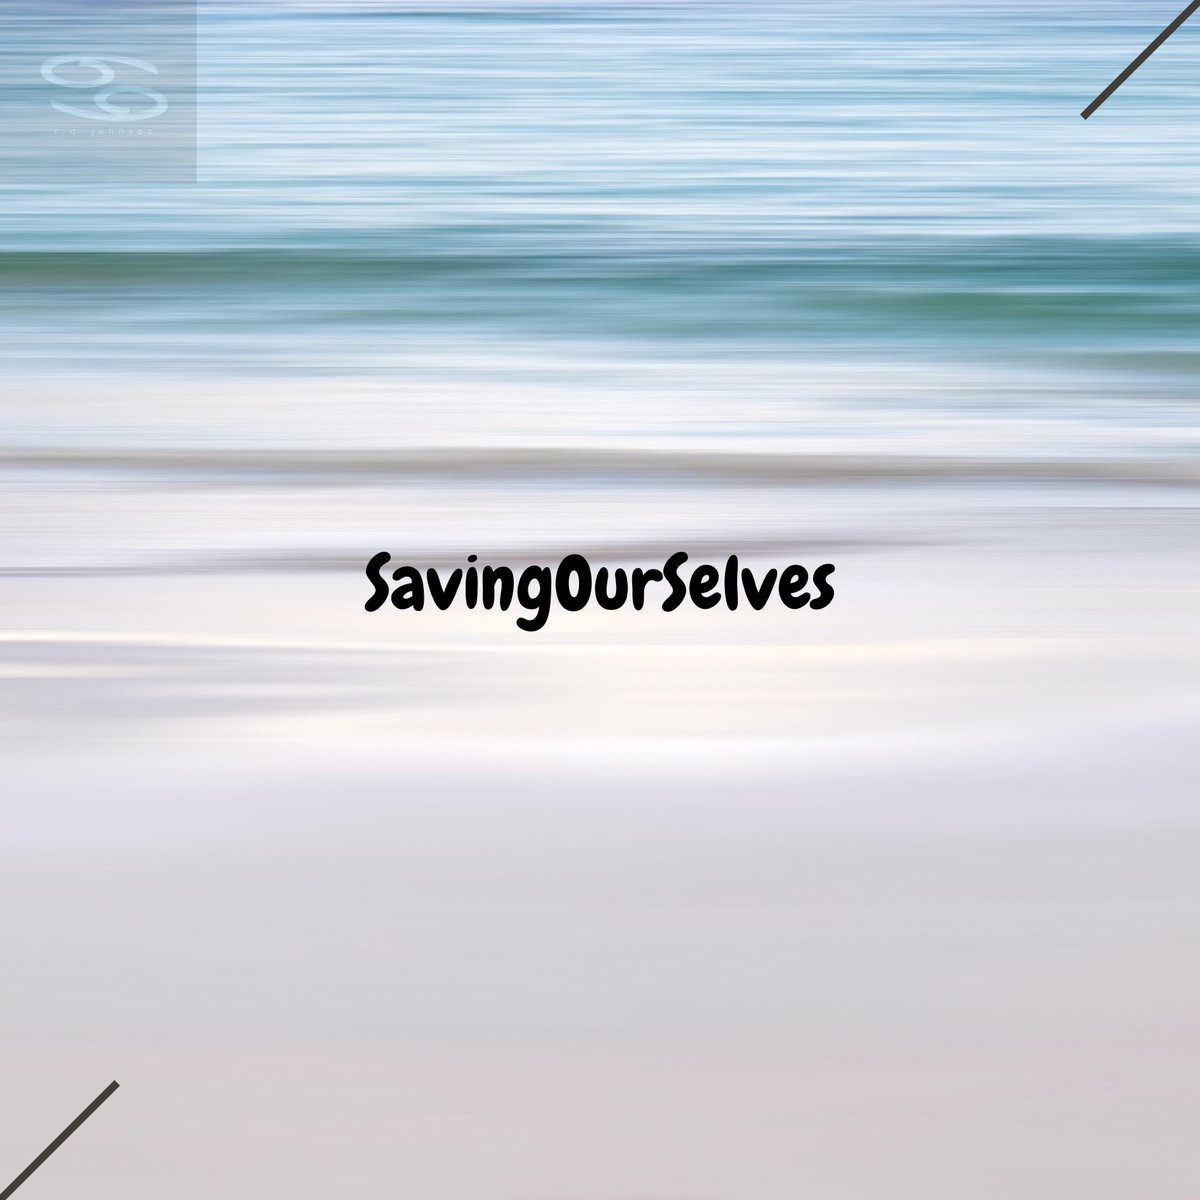 🚨 SURPRISE MICROCHAP ALERT 🚨

A new year brings a new collection of poems. SavingOurSelves, a microchap inspired by @sza latest album, SOS. Hope you all enjoy! 

dailydrunkmag.com/2023/01/17/sav…

#writing #sos #savingourselves #poetry #WritingCommunity #poetrycommunity #sza